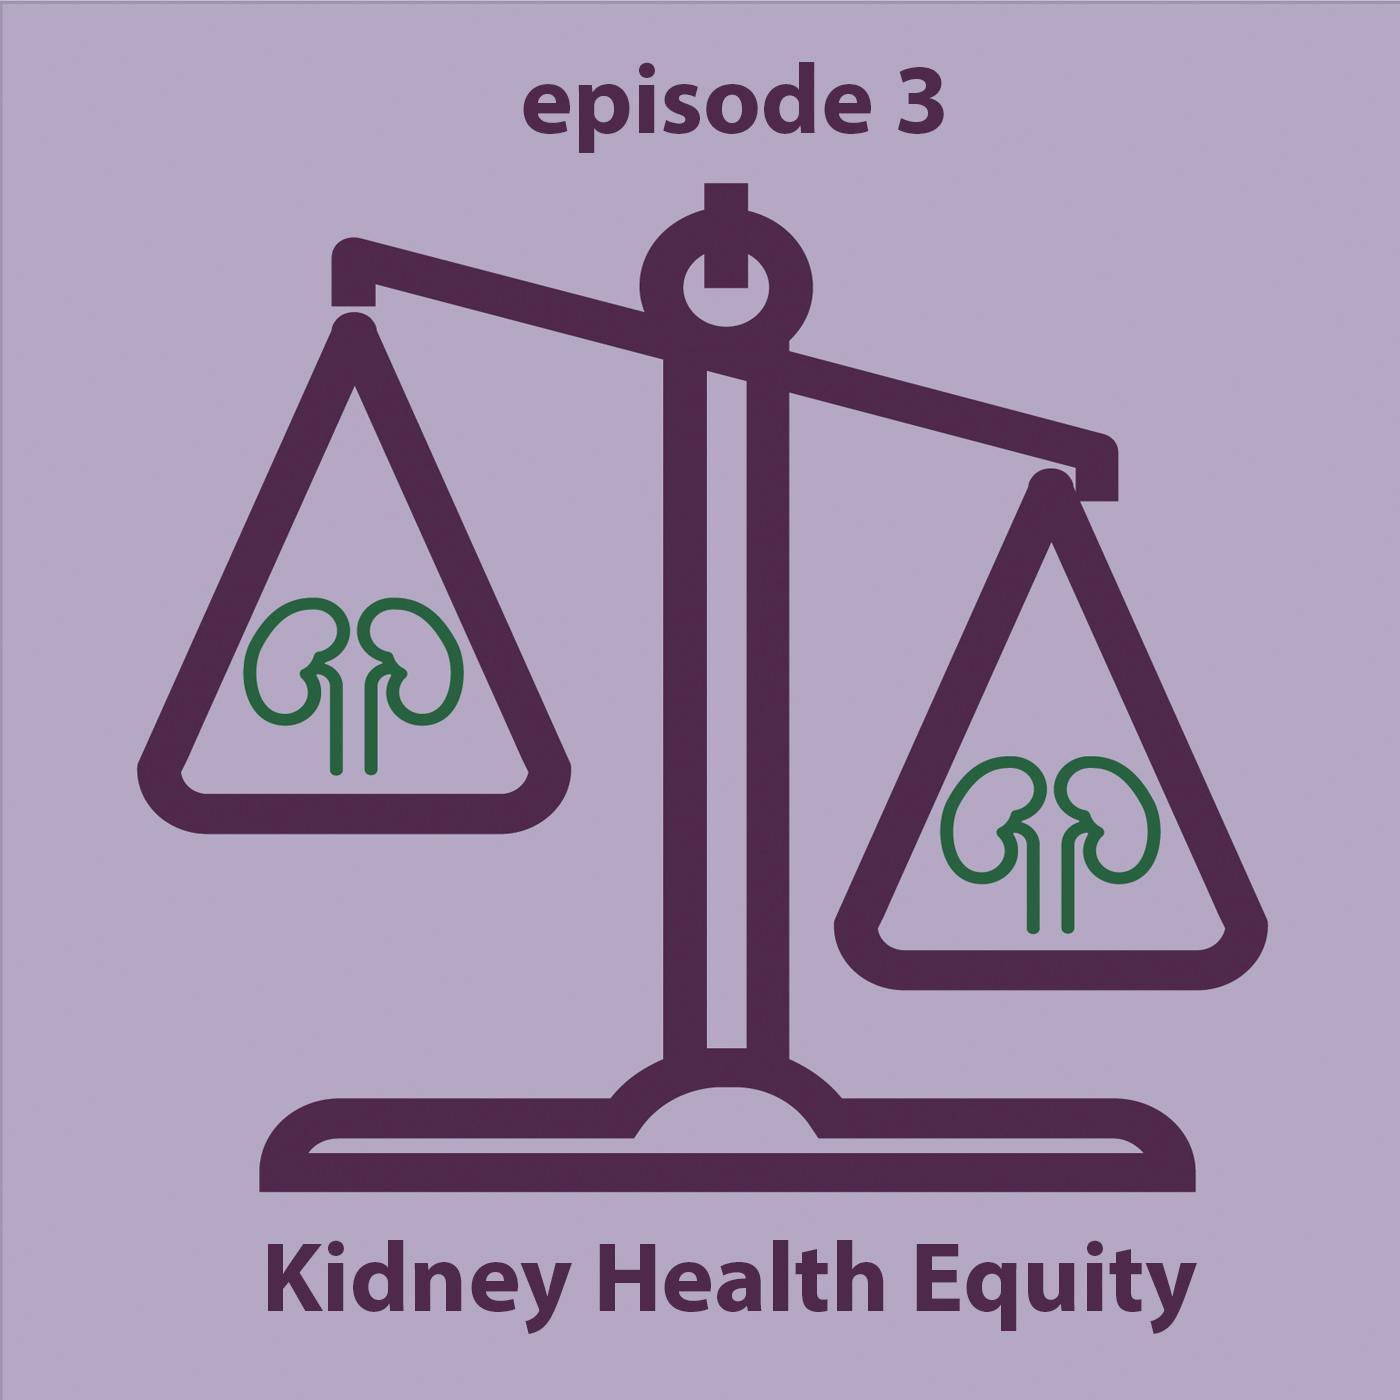 Kidney Health Equity: We’re All Invested